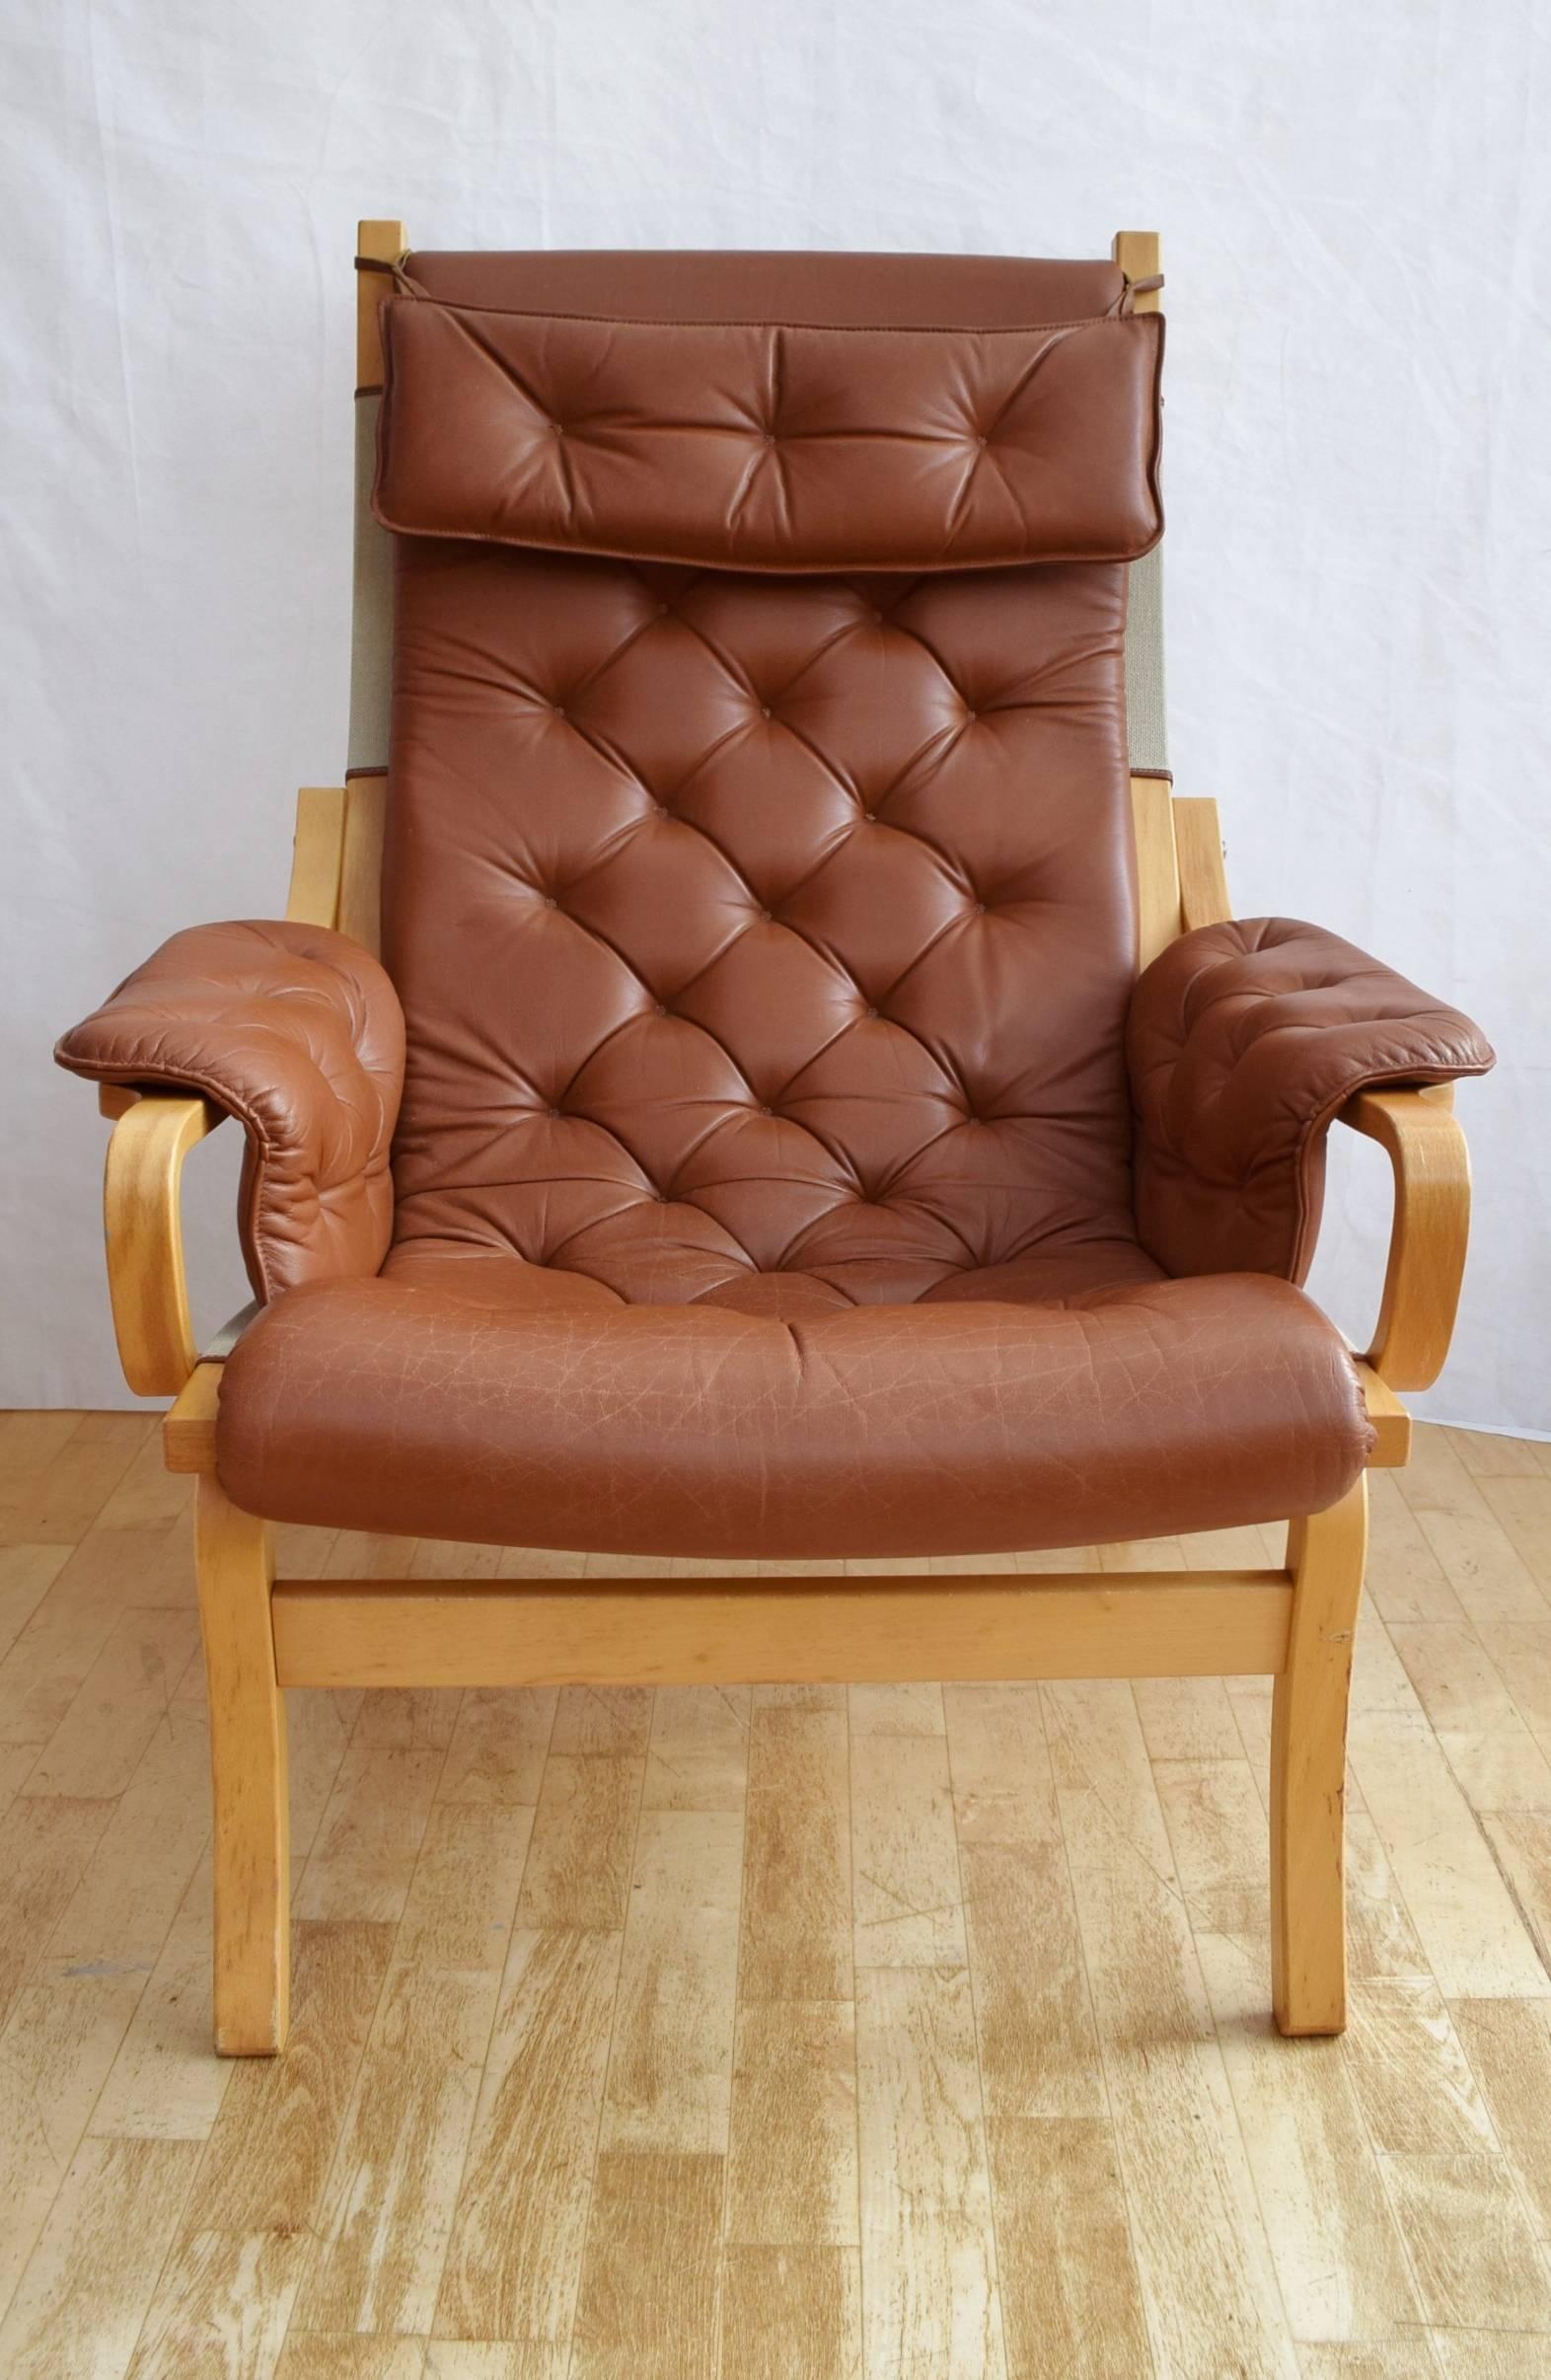 Designer: Danish design

Manufacturer: Unknown

Country: Denmark

Date: 1960s

Material: Tan leather canvas and beechwood.

Maximum dimensions: 83cm wide, 87cm deep, 100cm tall.
Seat height is 44cm to front.

Condition: Excellent sturdy